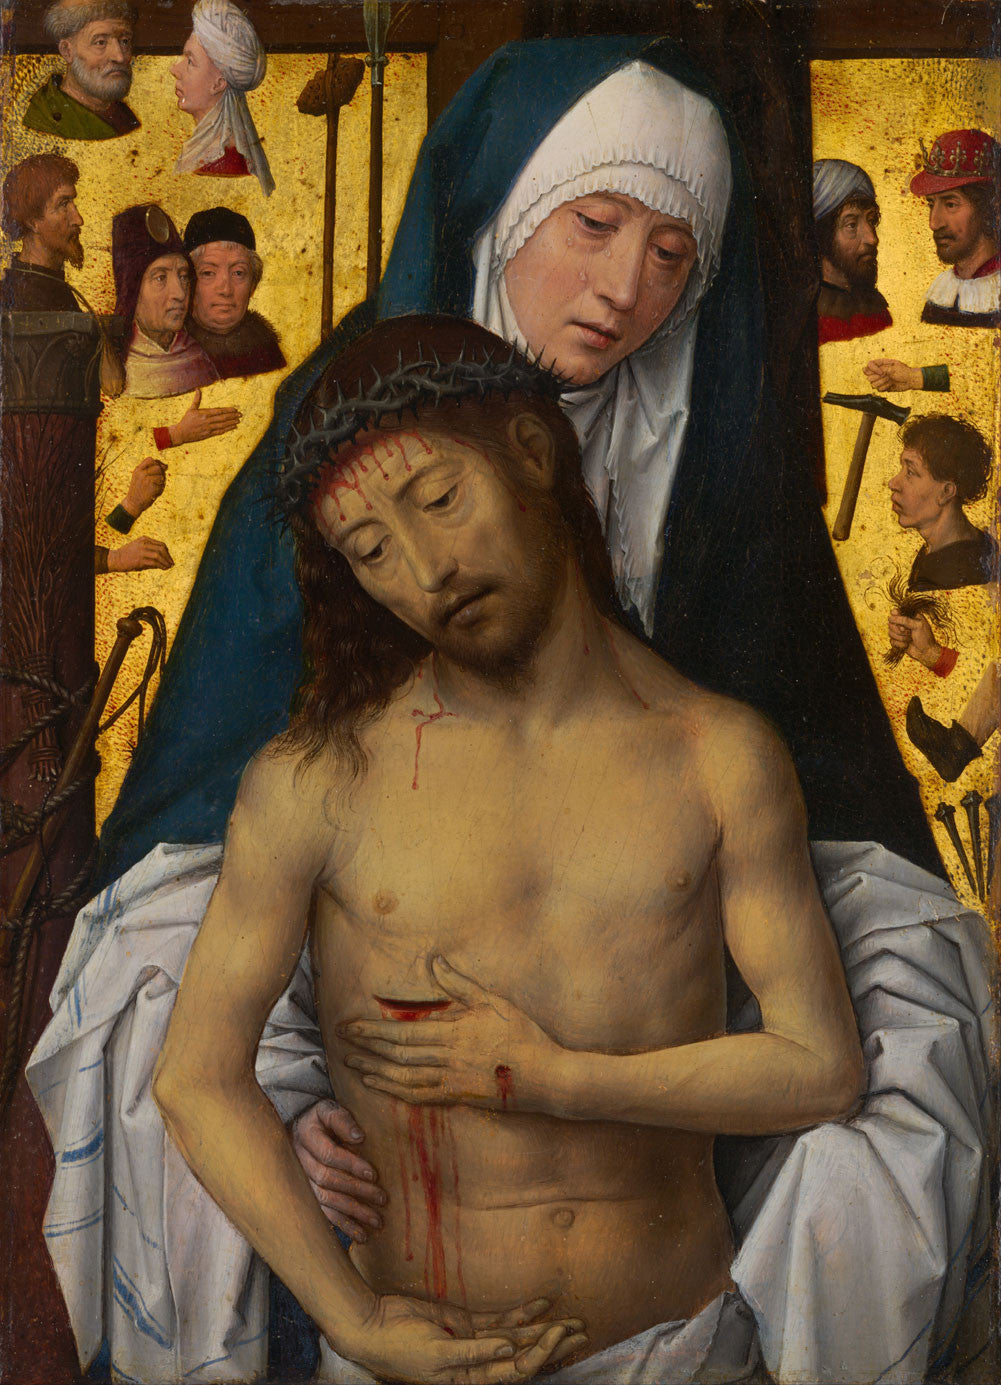 Hans Memling - The Man of Sorrows in the arms of the Virgin